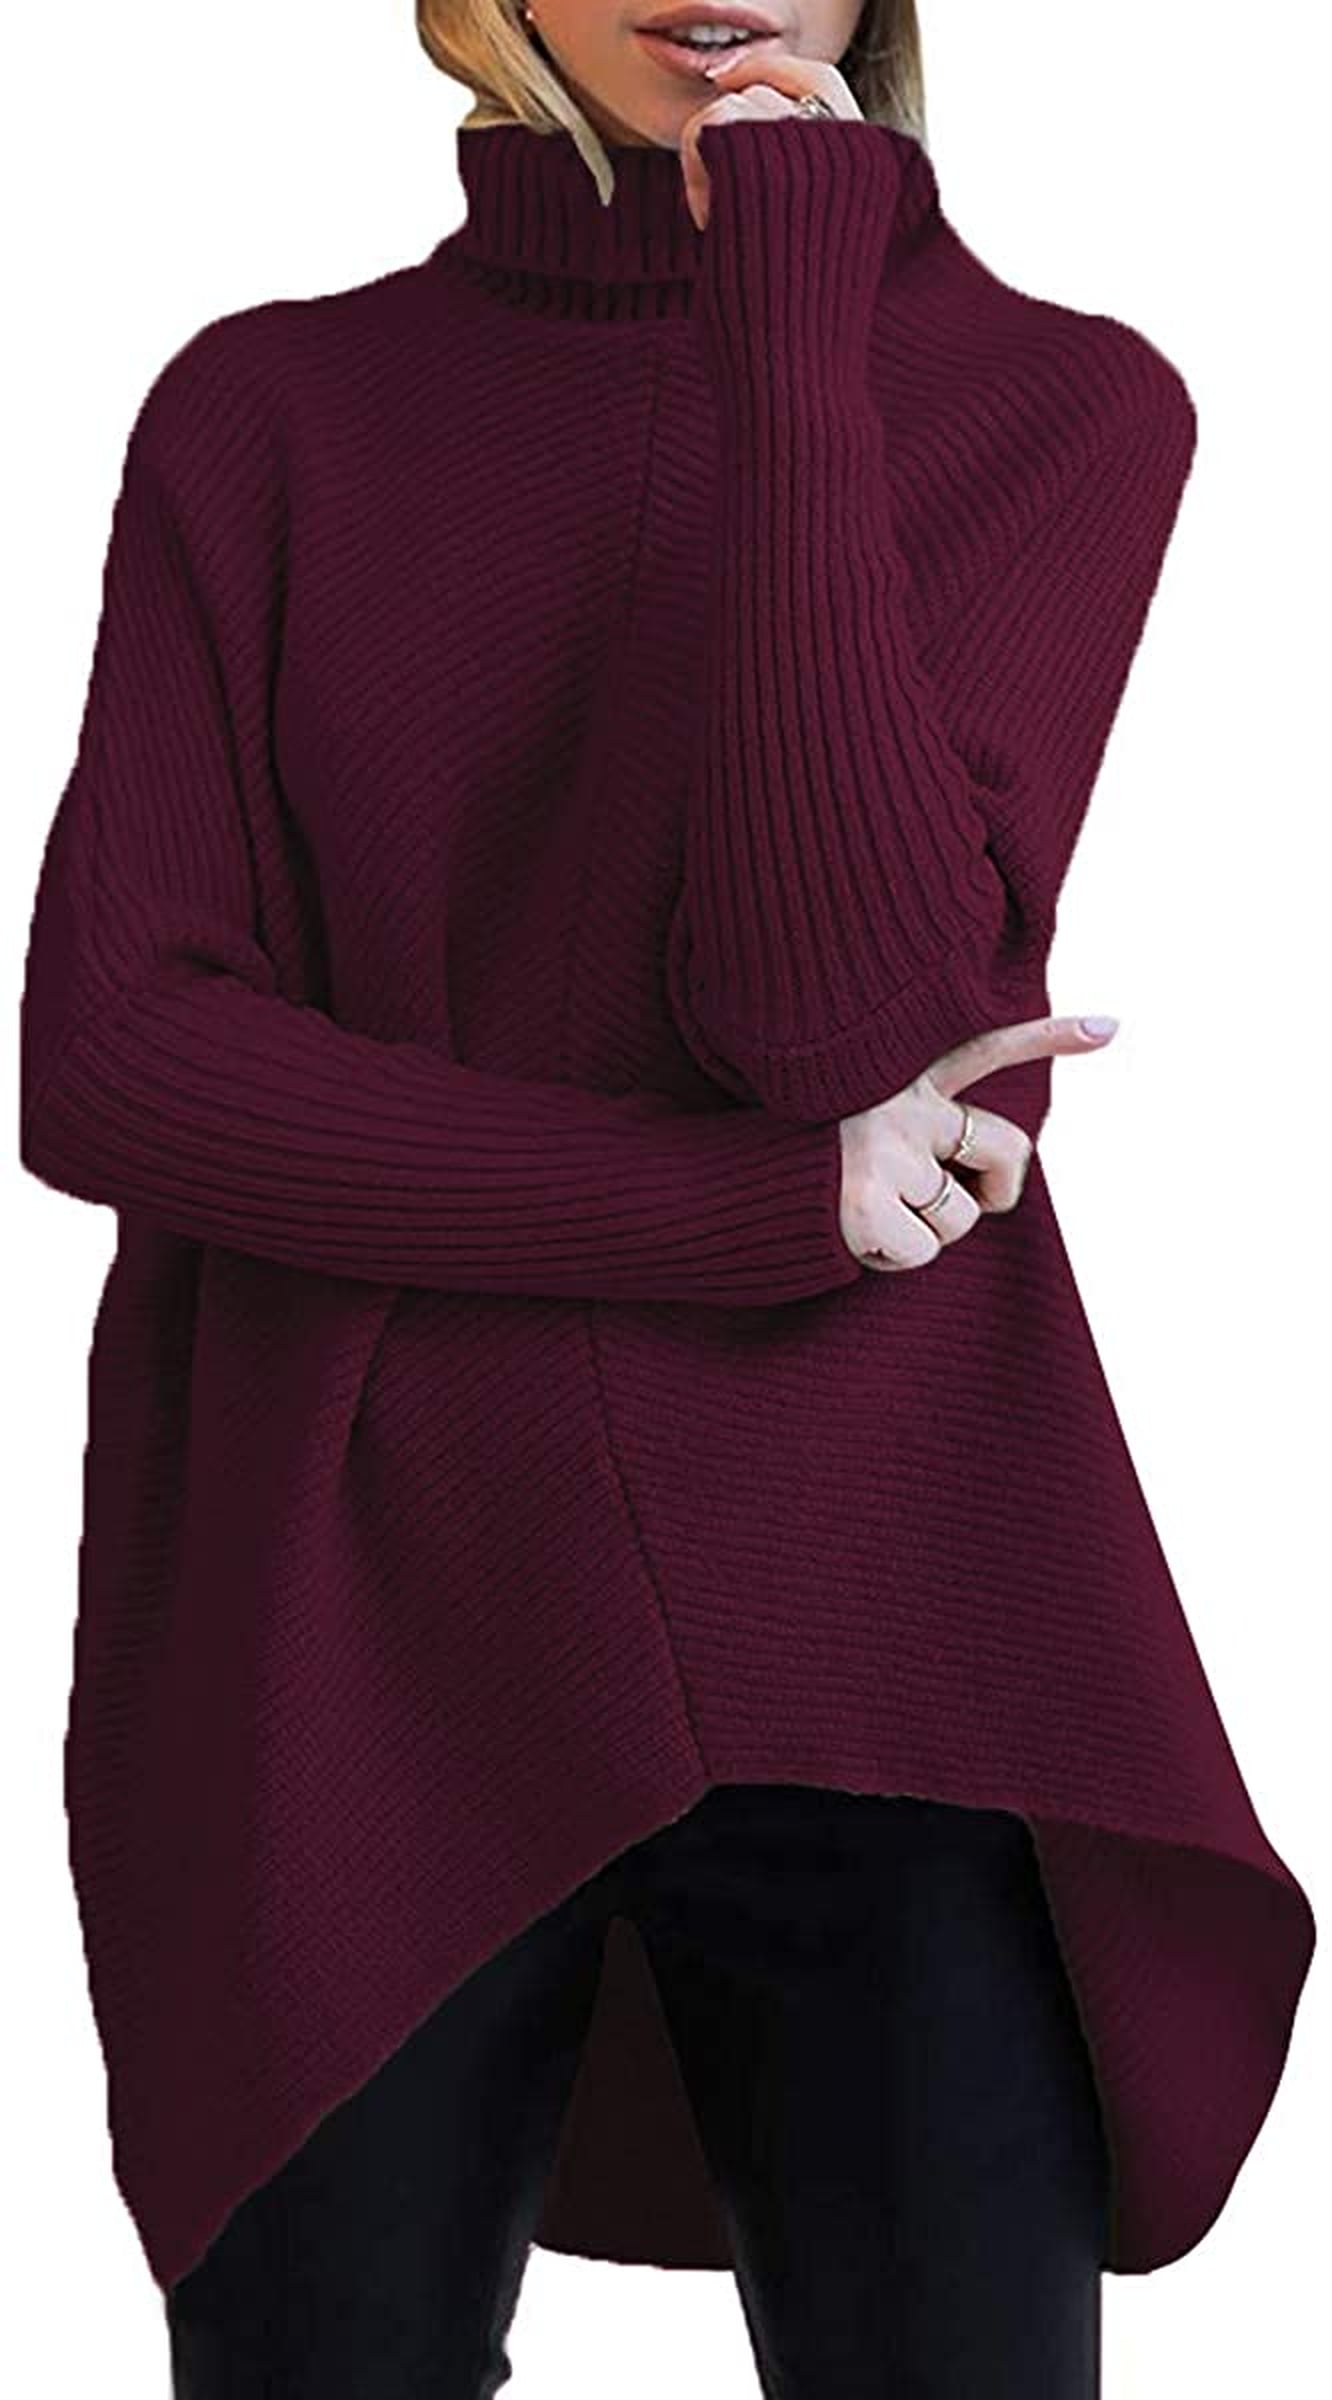 Best Top Rated Sweater From Amazon | Editor Review | POPSUGAR Fashion